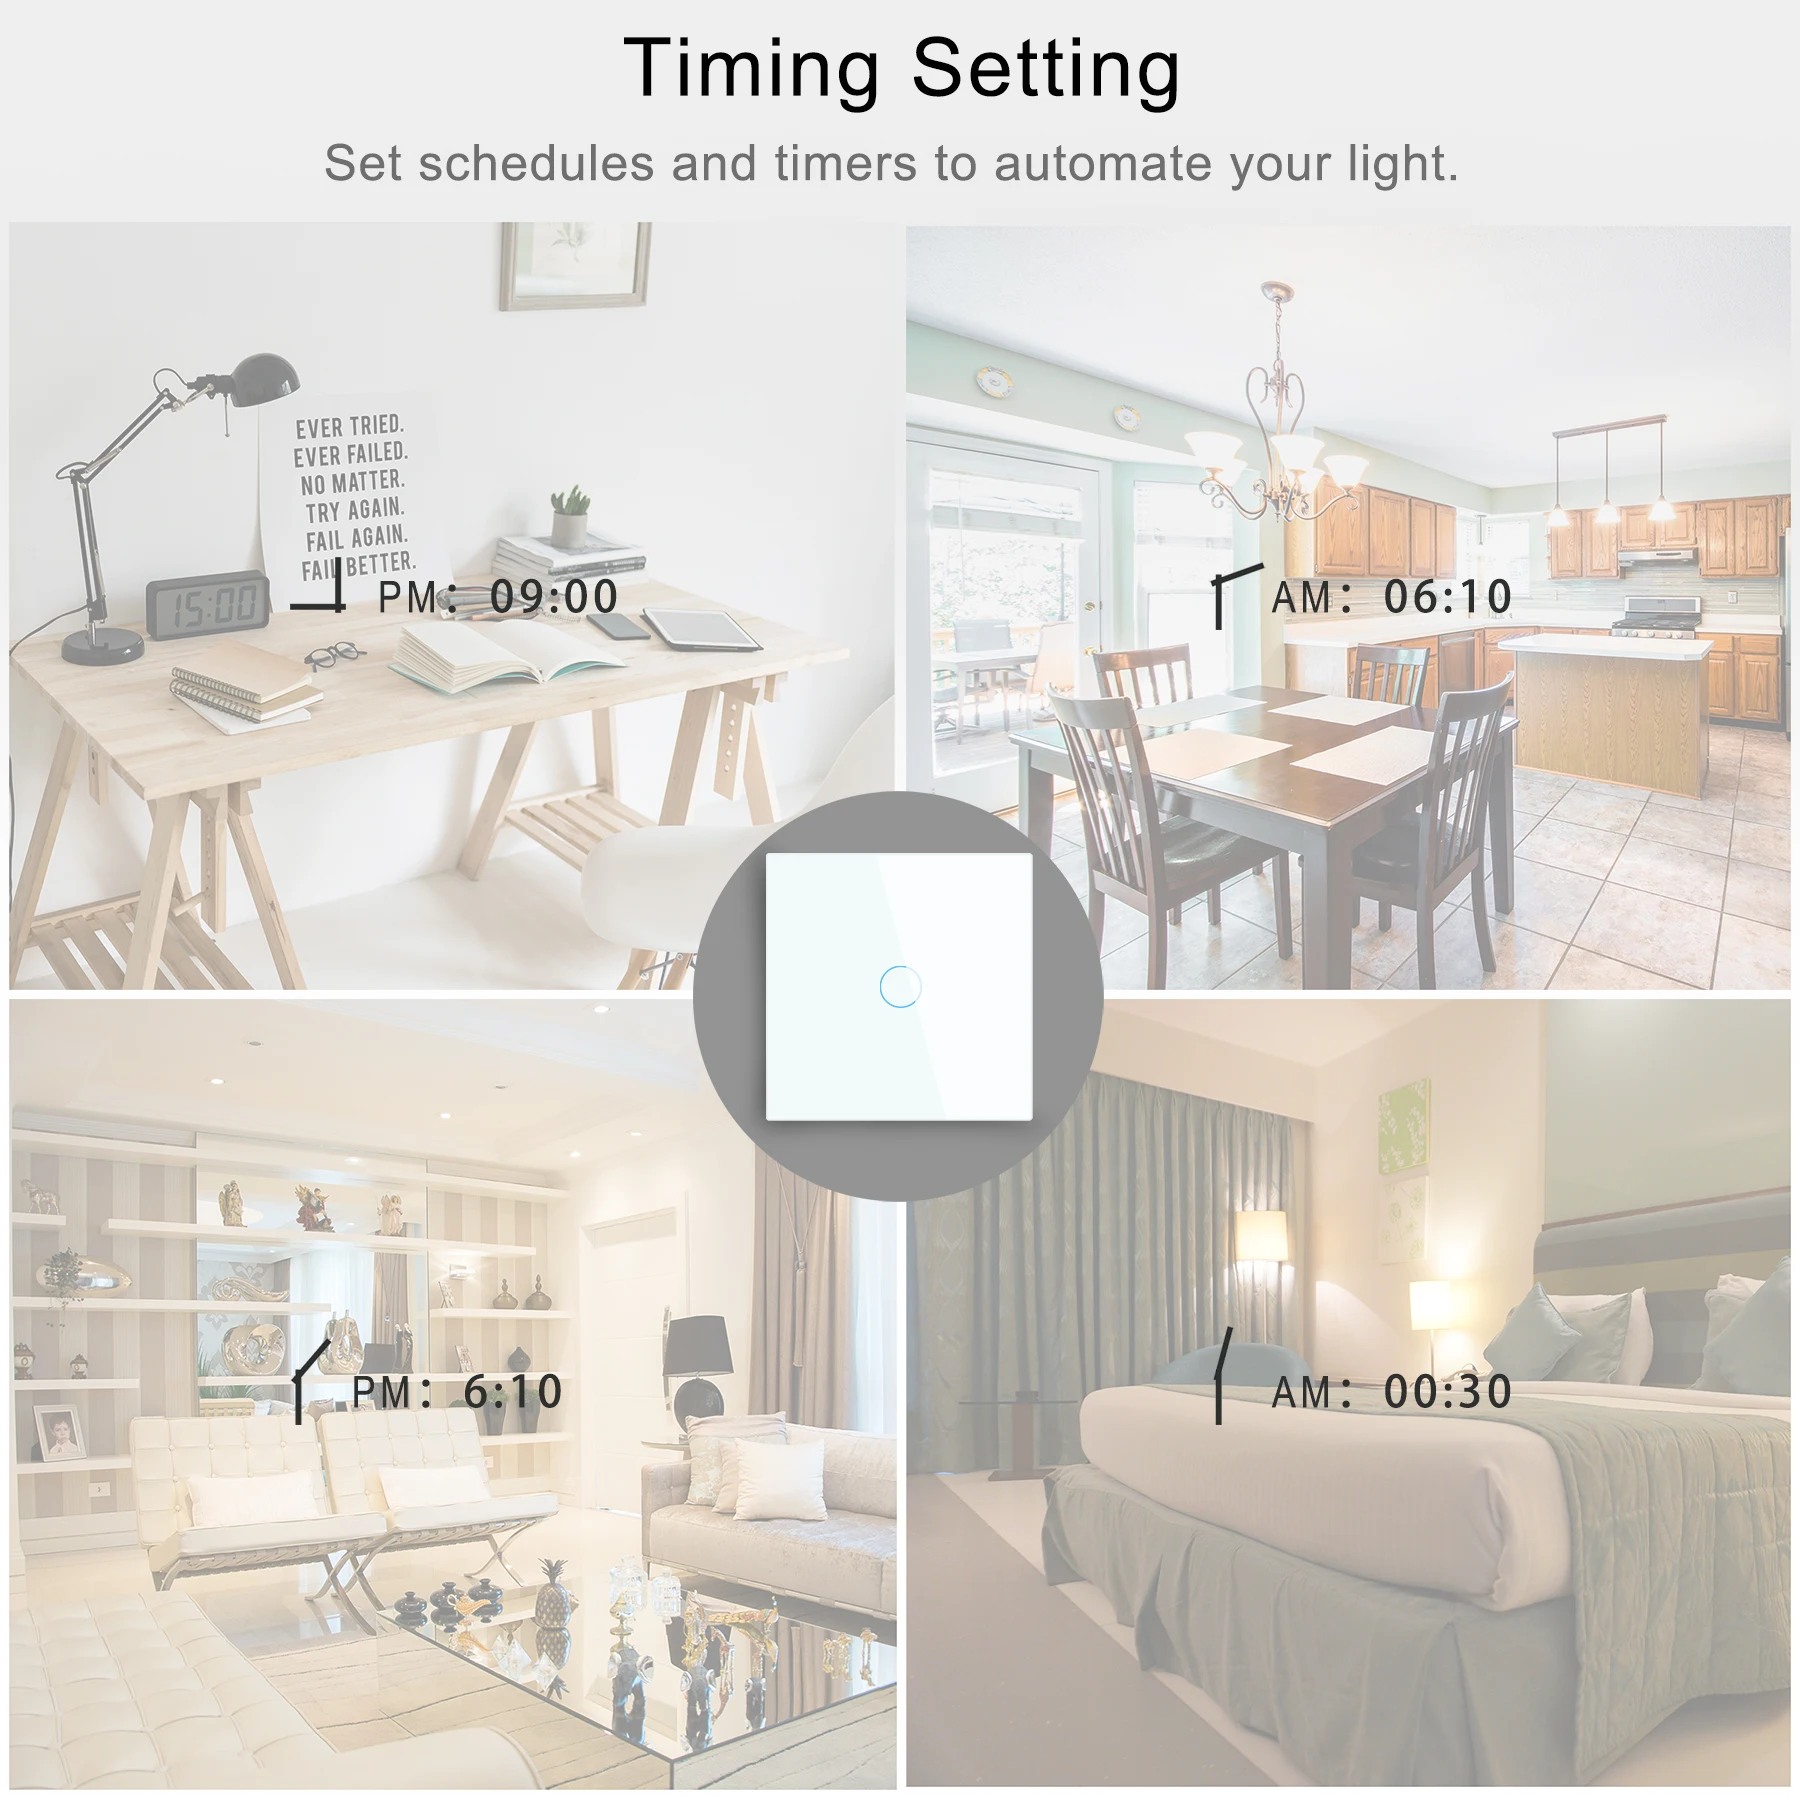 Tuya Smart EU 1/2/3/4 Gang Wifi RF433Mhz Touch Wall Light Switches Remote Alexa Google Home Voice Control Home Automation